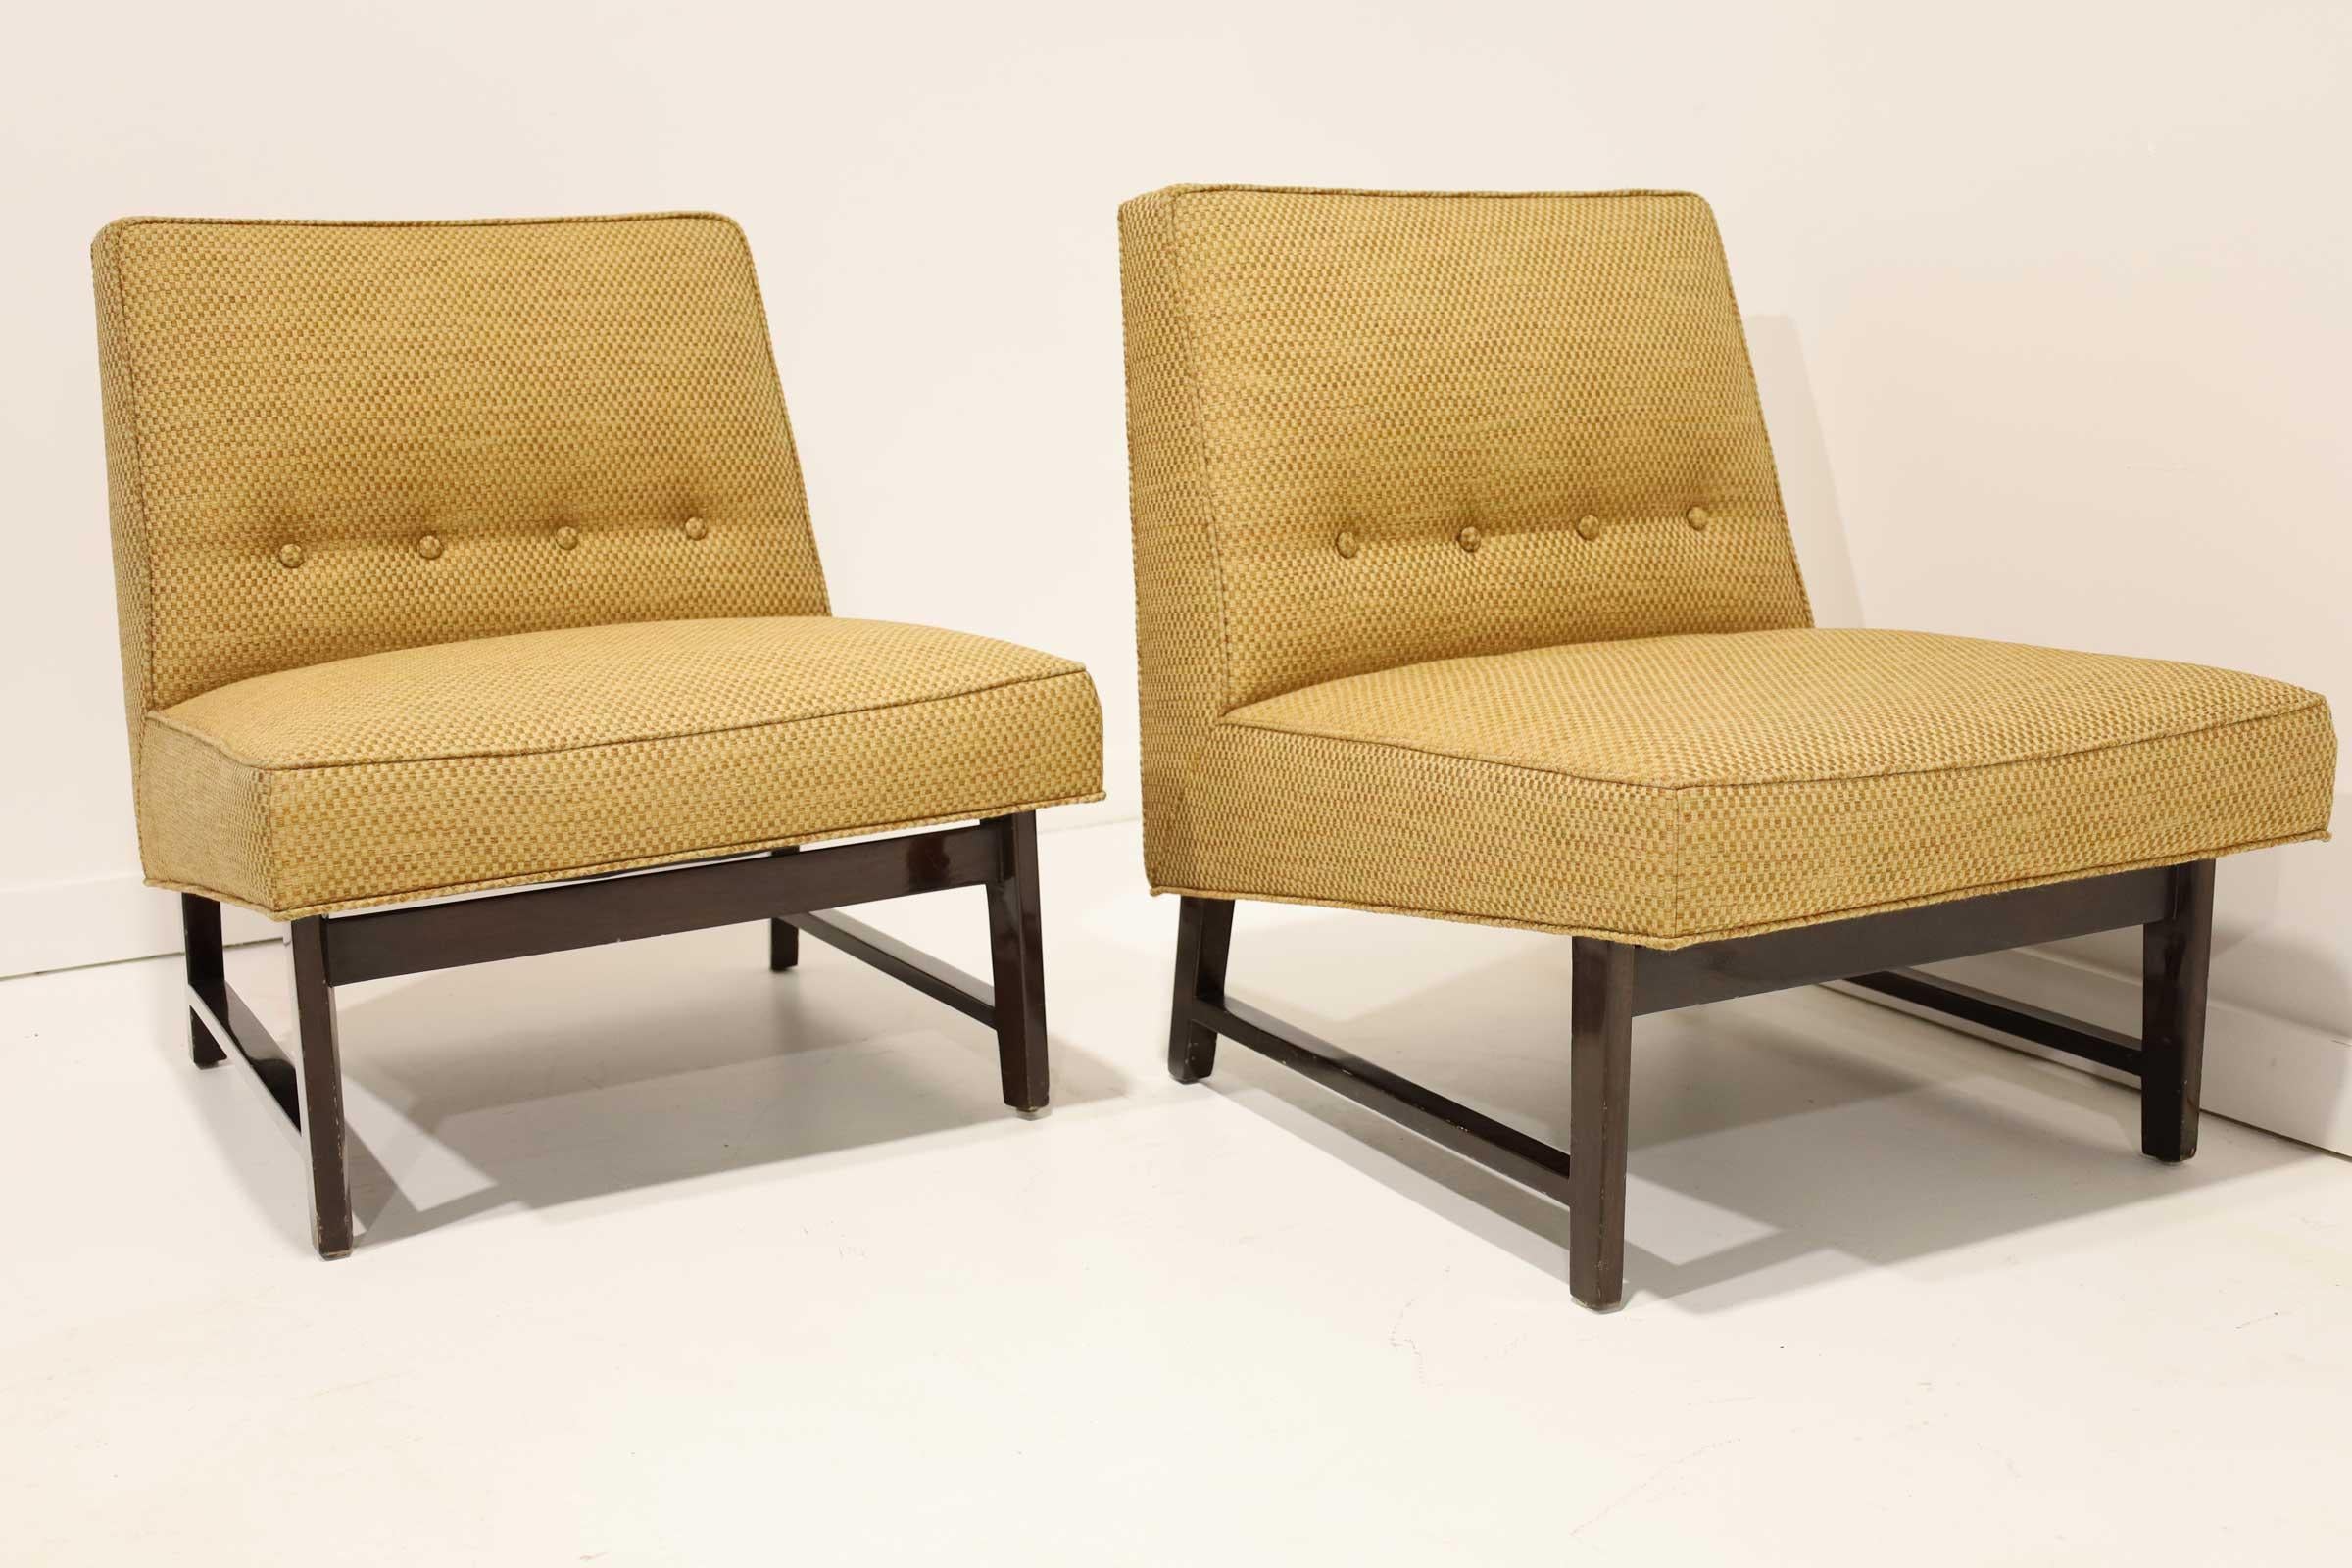 Pair of Edward Wormley for Dunbar Slipper Chairs in Gold Color Upholstery 4